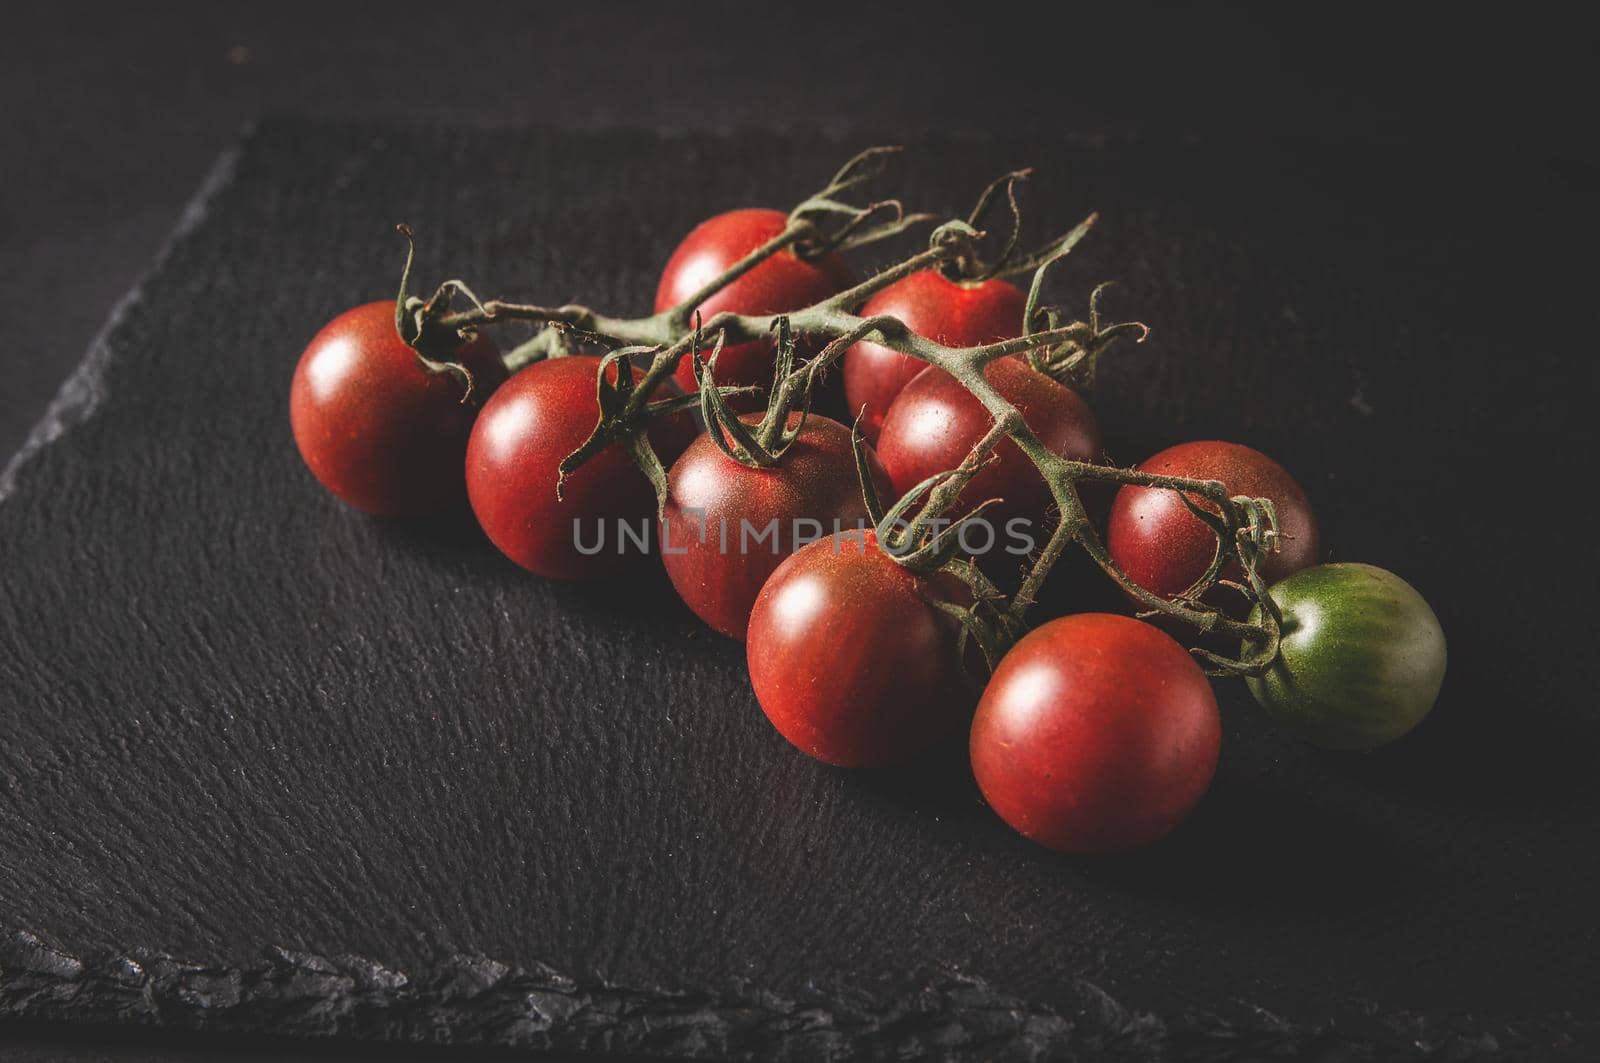 Bunch of fresh cherry tomatoes on a branch are located on a black serving board on a dark background